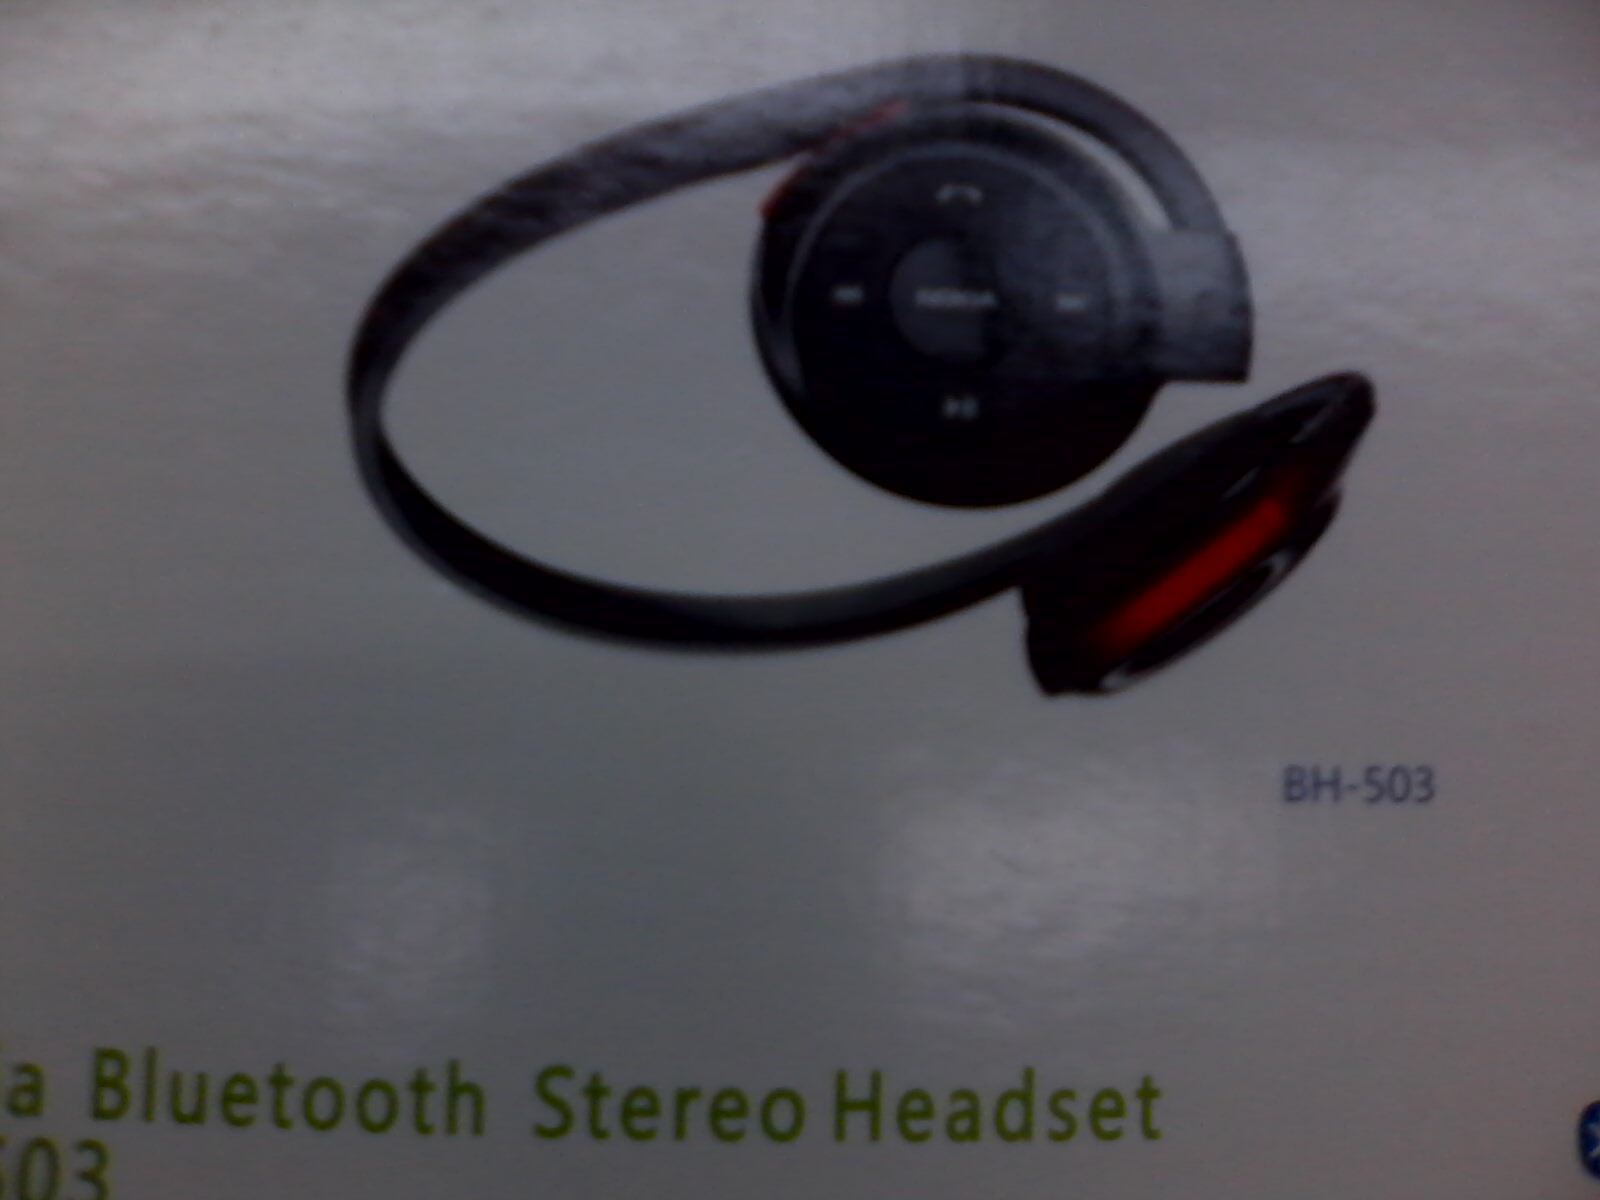 BLUTOOTH HEADSET FOR NOKIA bh -505 bh -503 bh -908 large image 0